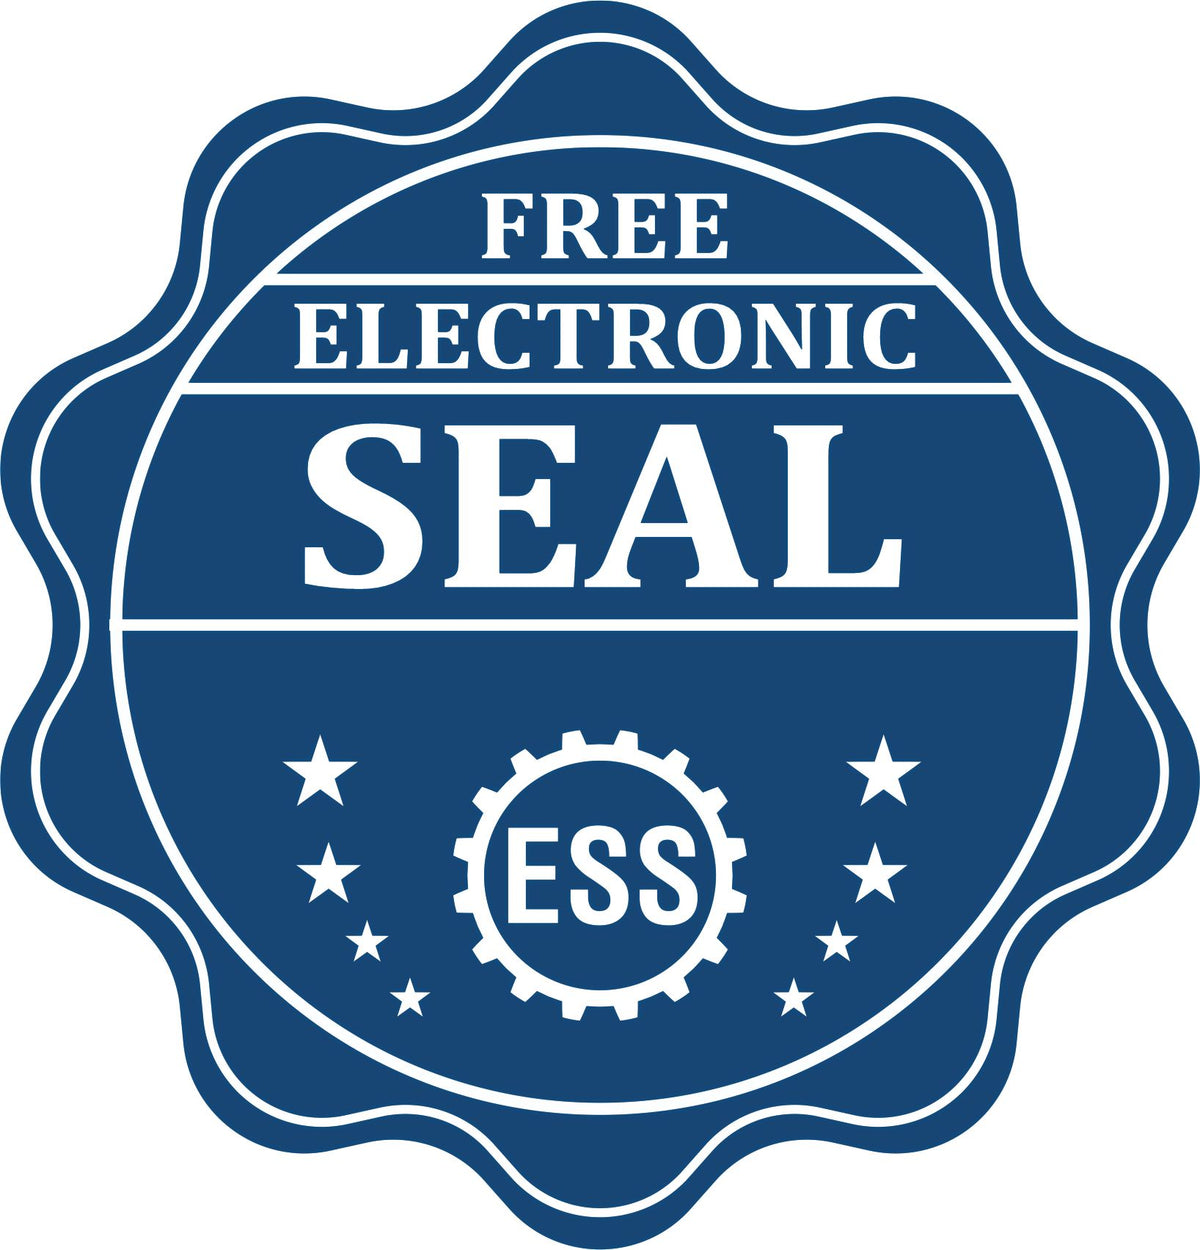 A badge showing a free electronic seal for the Heavy Duty Cast Iron Florida Architect Embosser with stars and the ESS gear on the emblem.